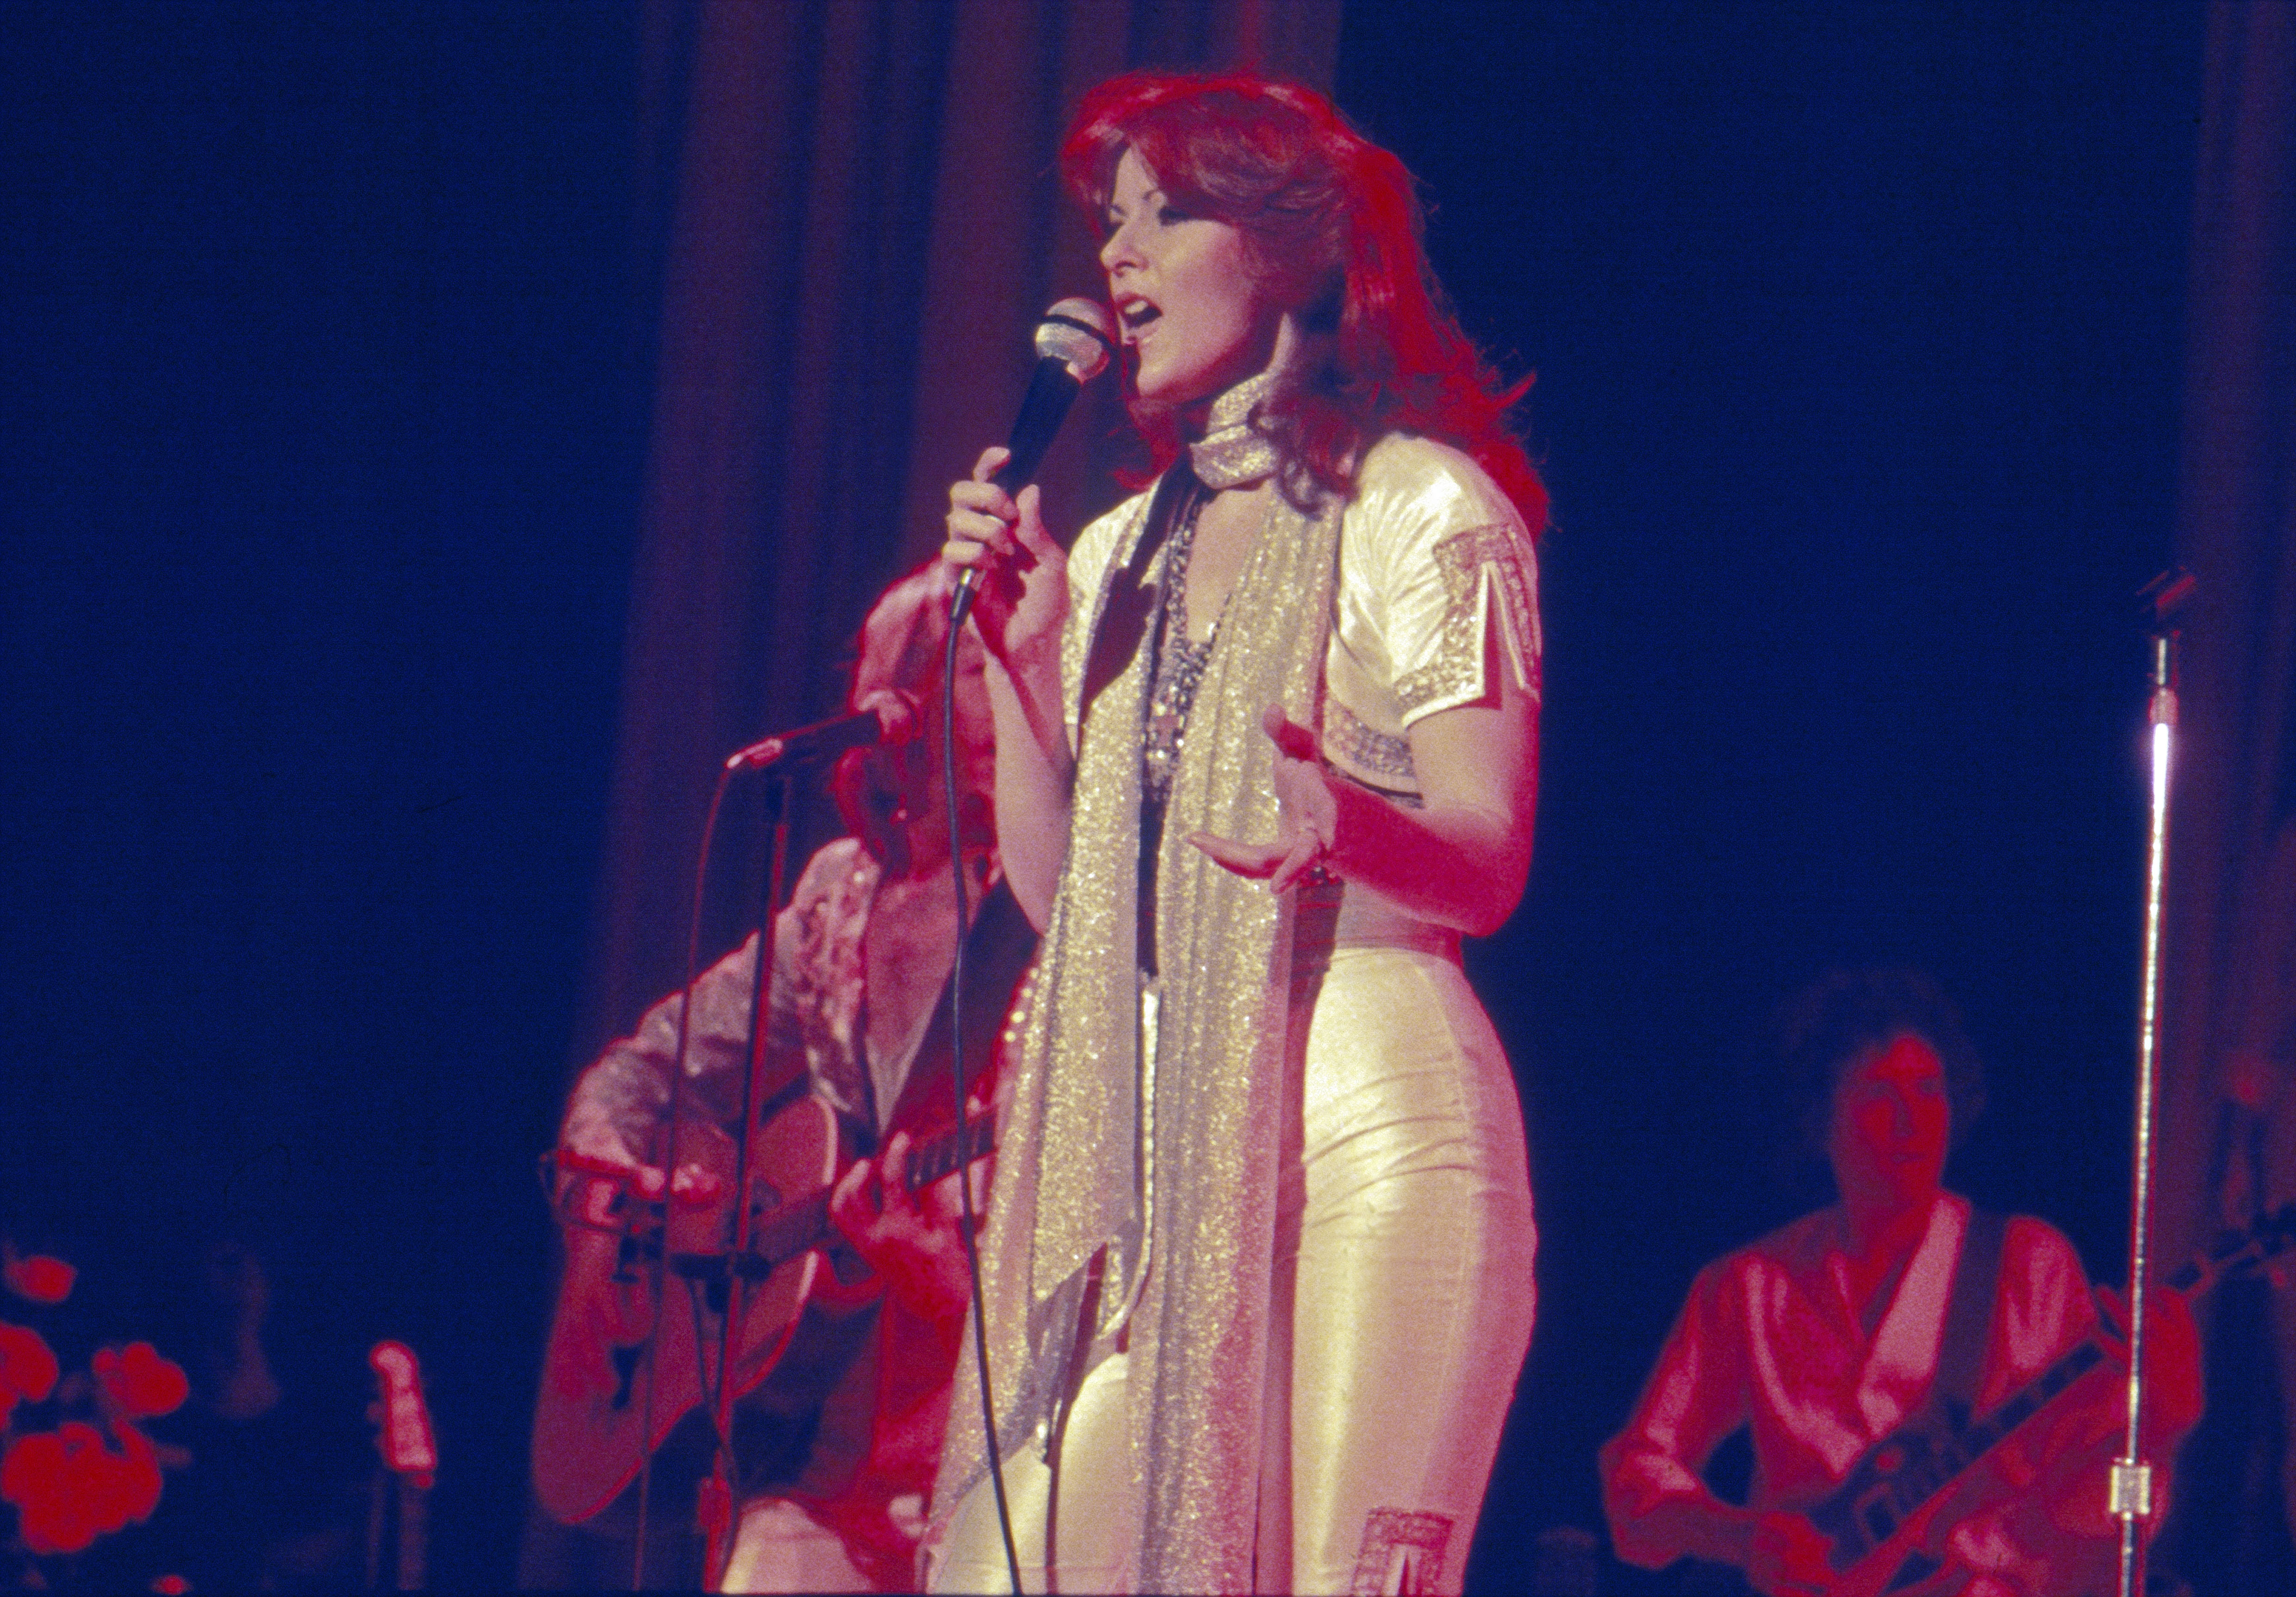 Anni-Frid Lyngstad from the Swedish pop group ABBA at the concert in Hamburg on February 10, 1977. | Source: Getty Images